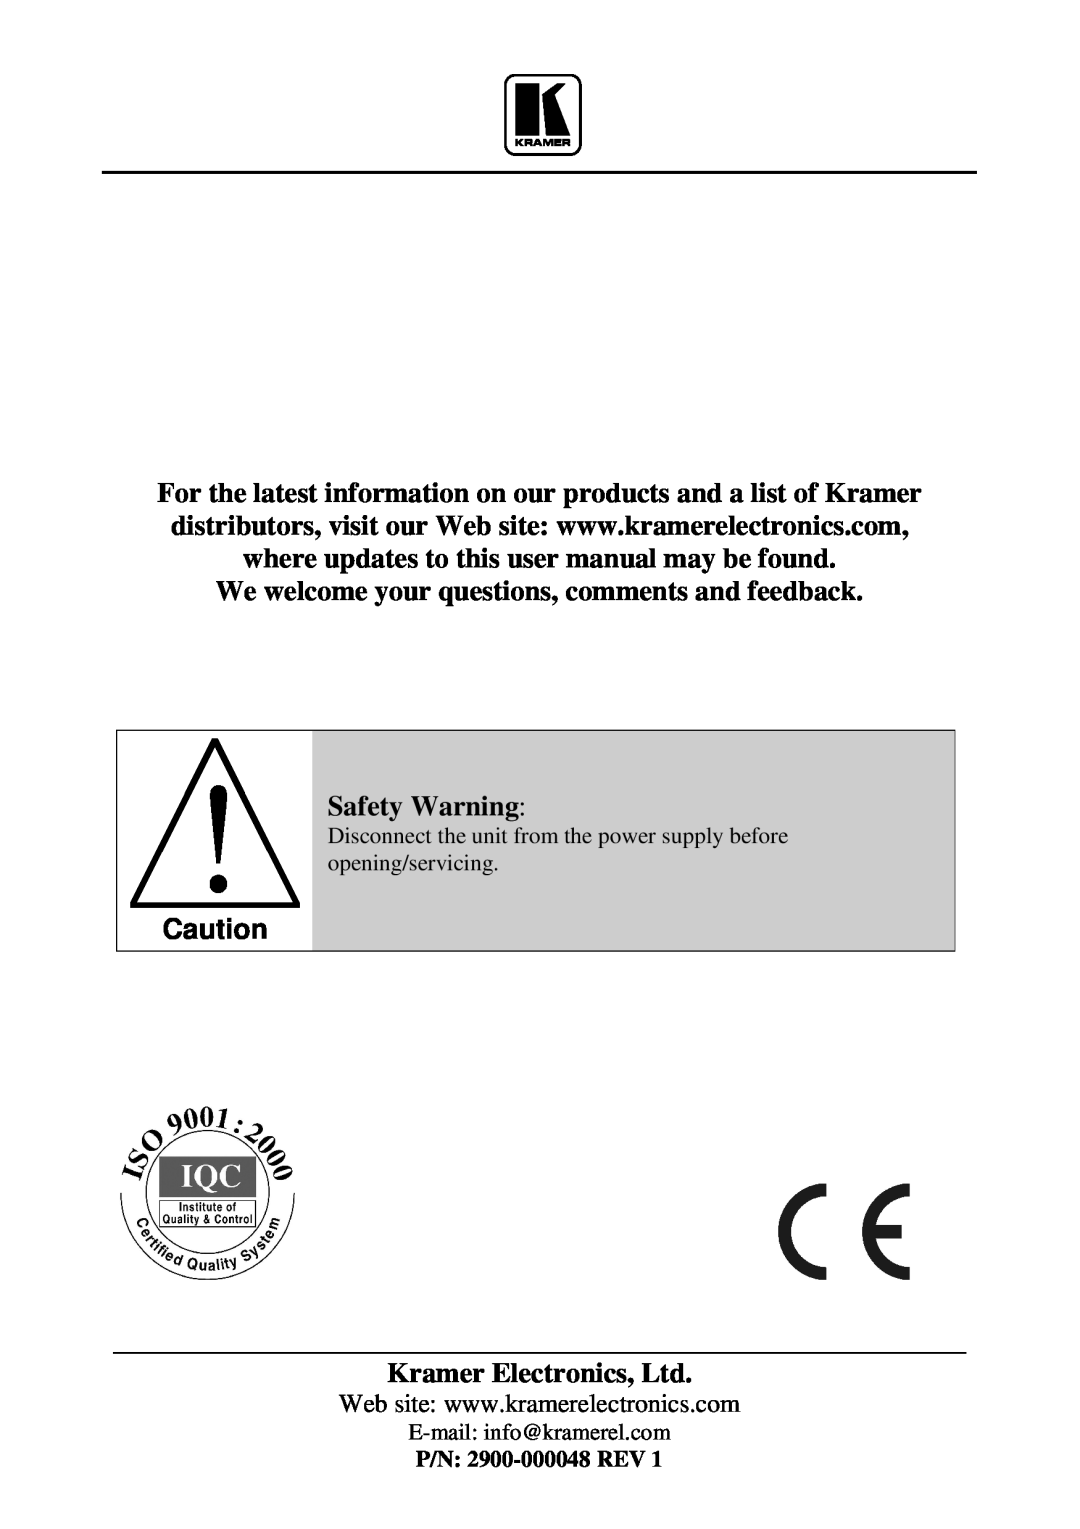 Kramer Electronics VA-256D user manual We welcome your questions, comments and feedback, Safety Warning, P/N 2900-000048REV 